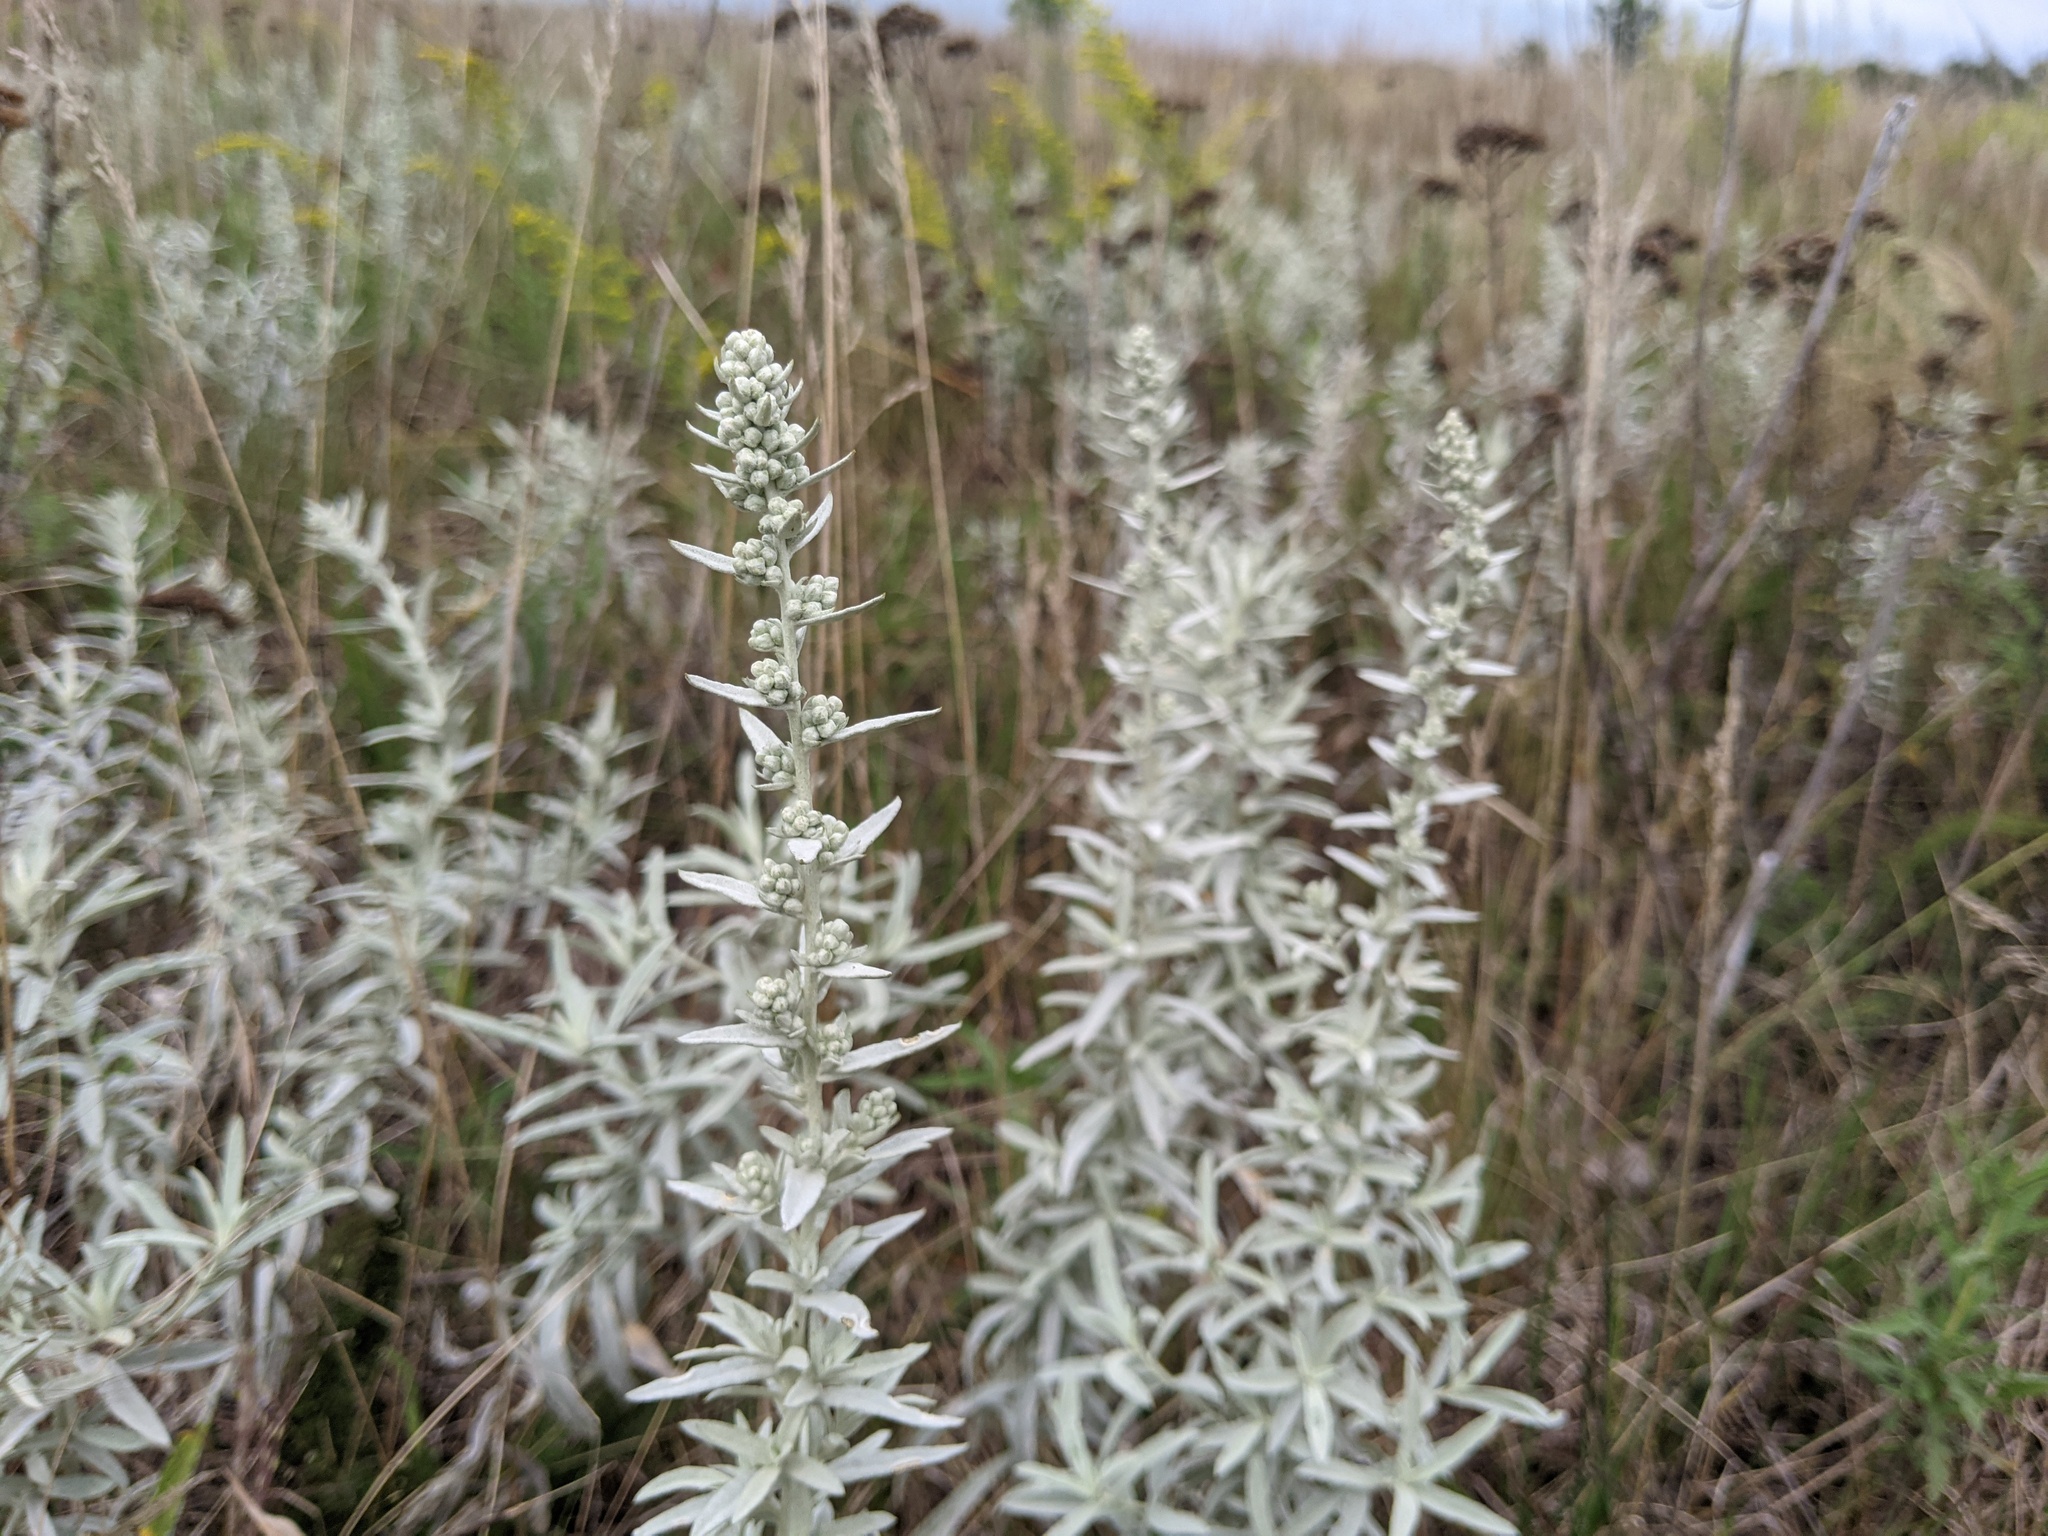 A grassland scene with white sage. It has pale silver green fuzzy leaves that contrast with the colors and textures of surrounding vegetation.